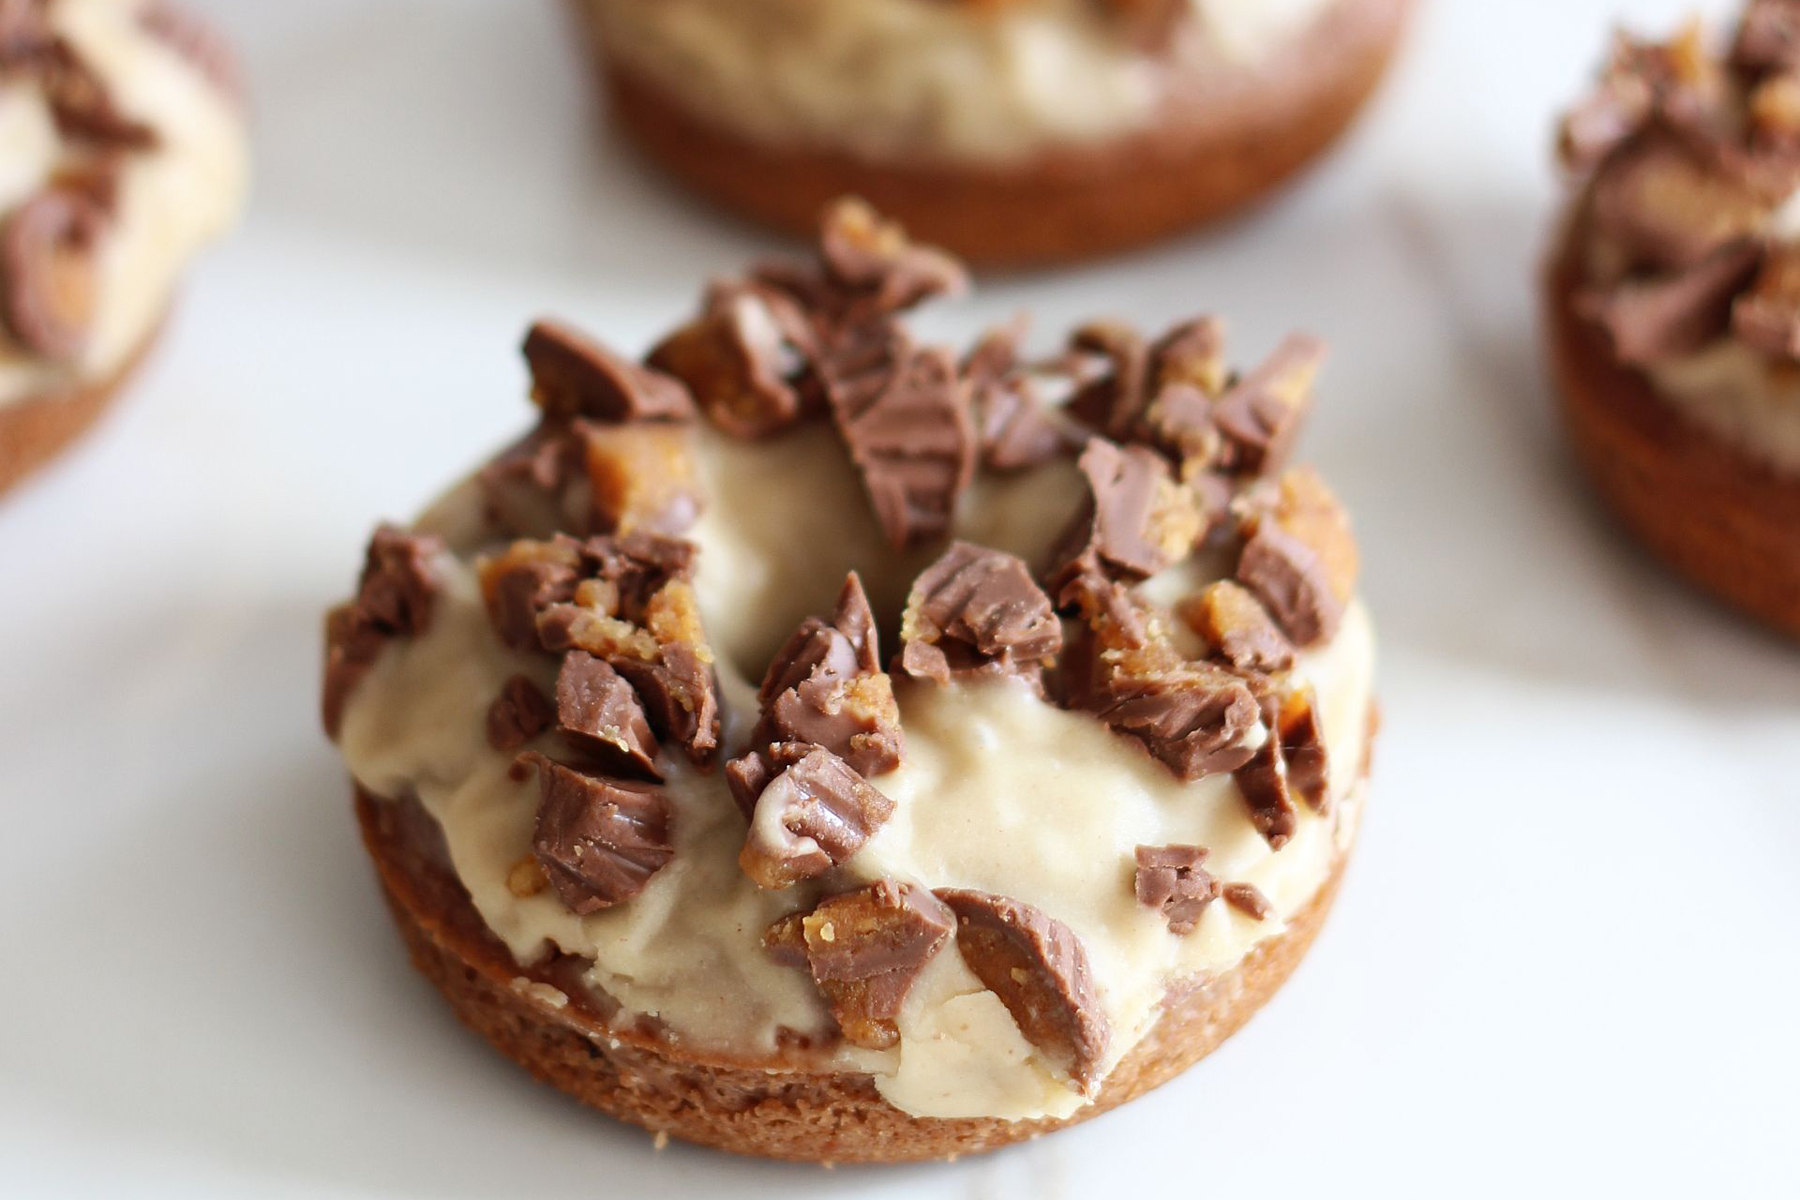 Baked Peanut Butter Chocolate Donuts Photo